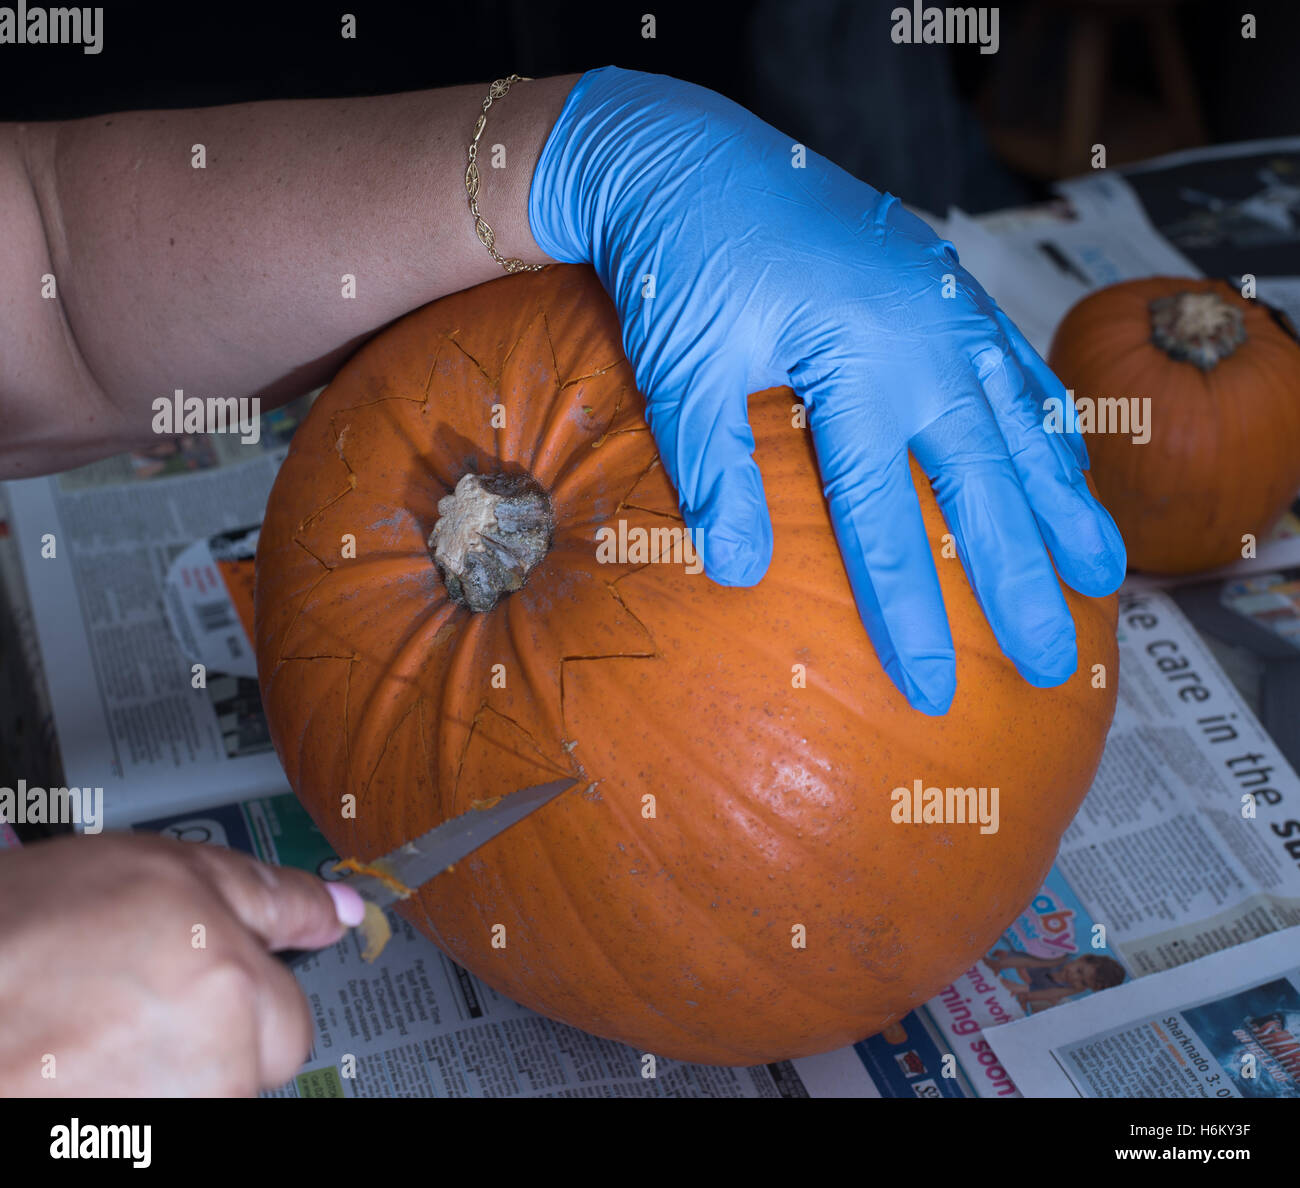 Pumkin carving - opening it up Stock Photo